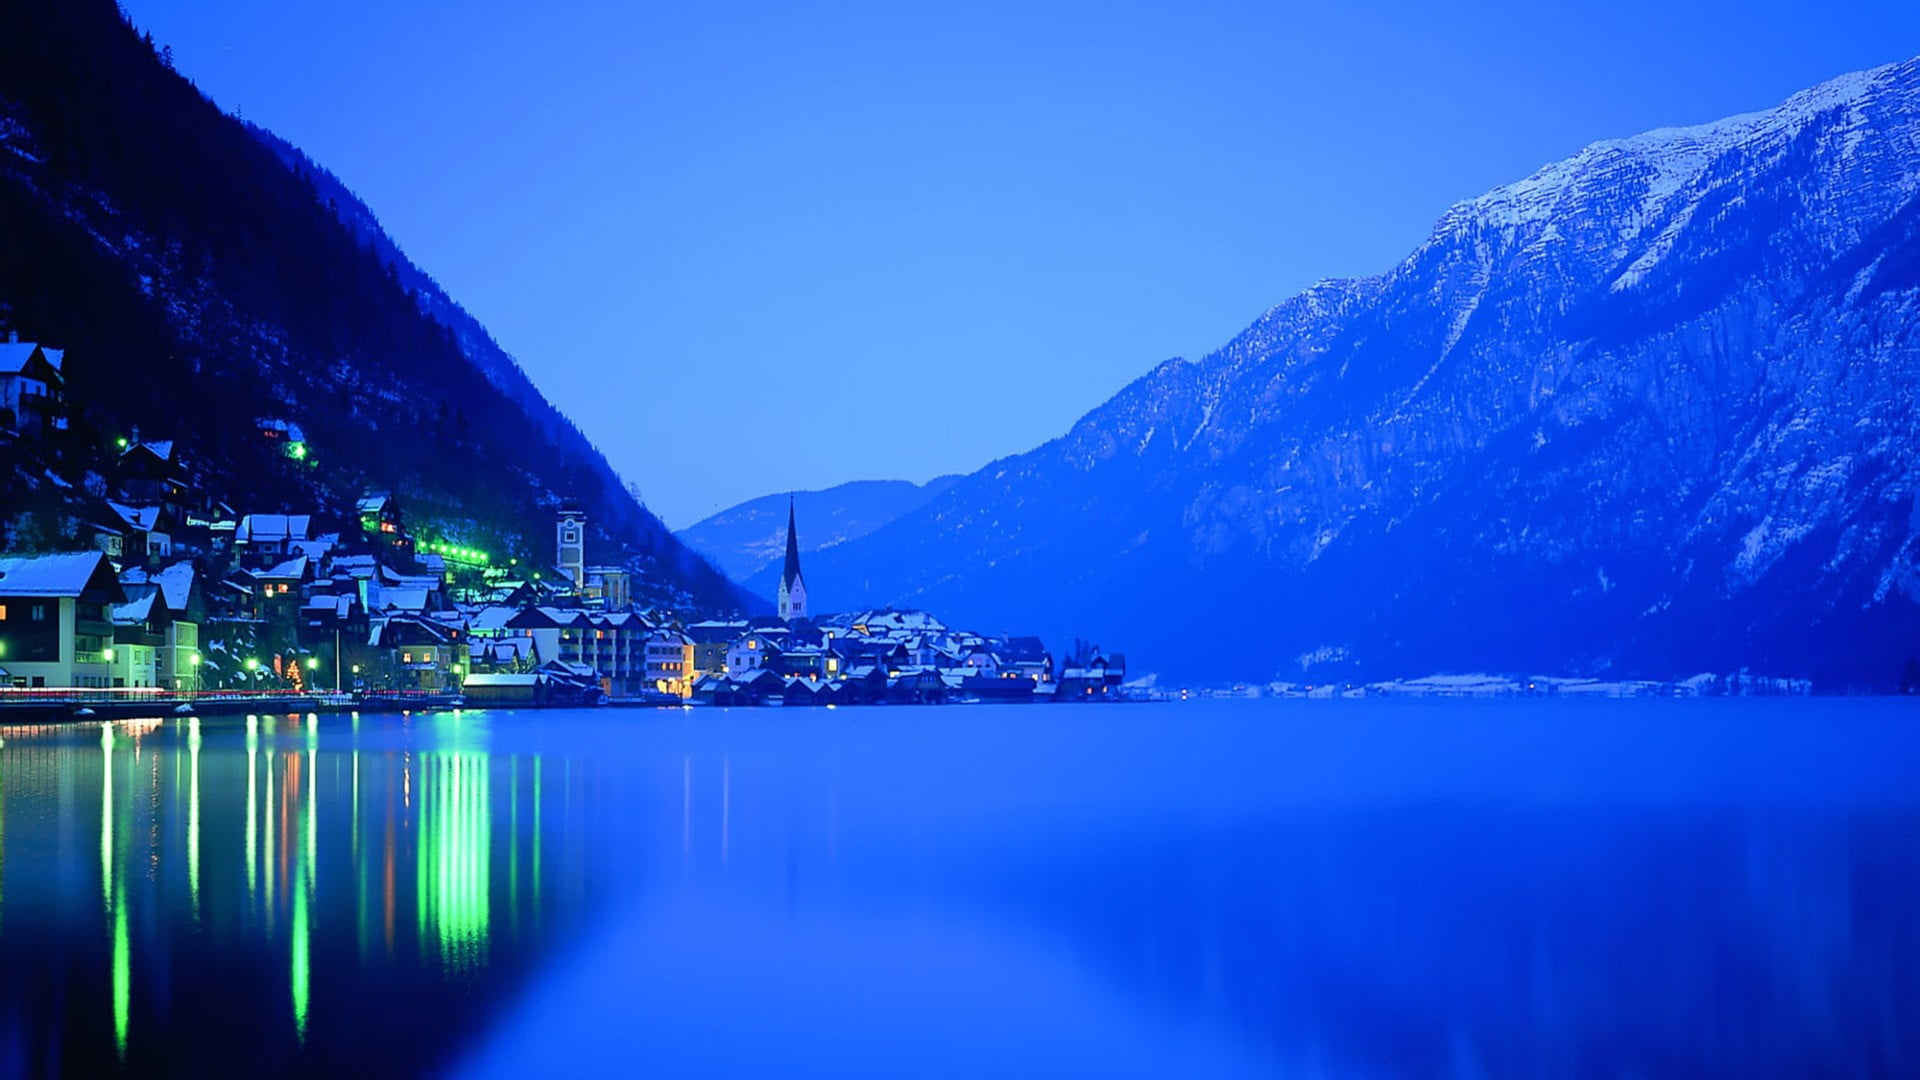 Night view of a village nestled by a lake surrounded by mountains in Hallstatt, Austria.